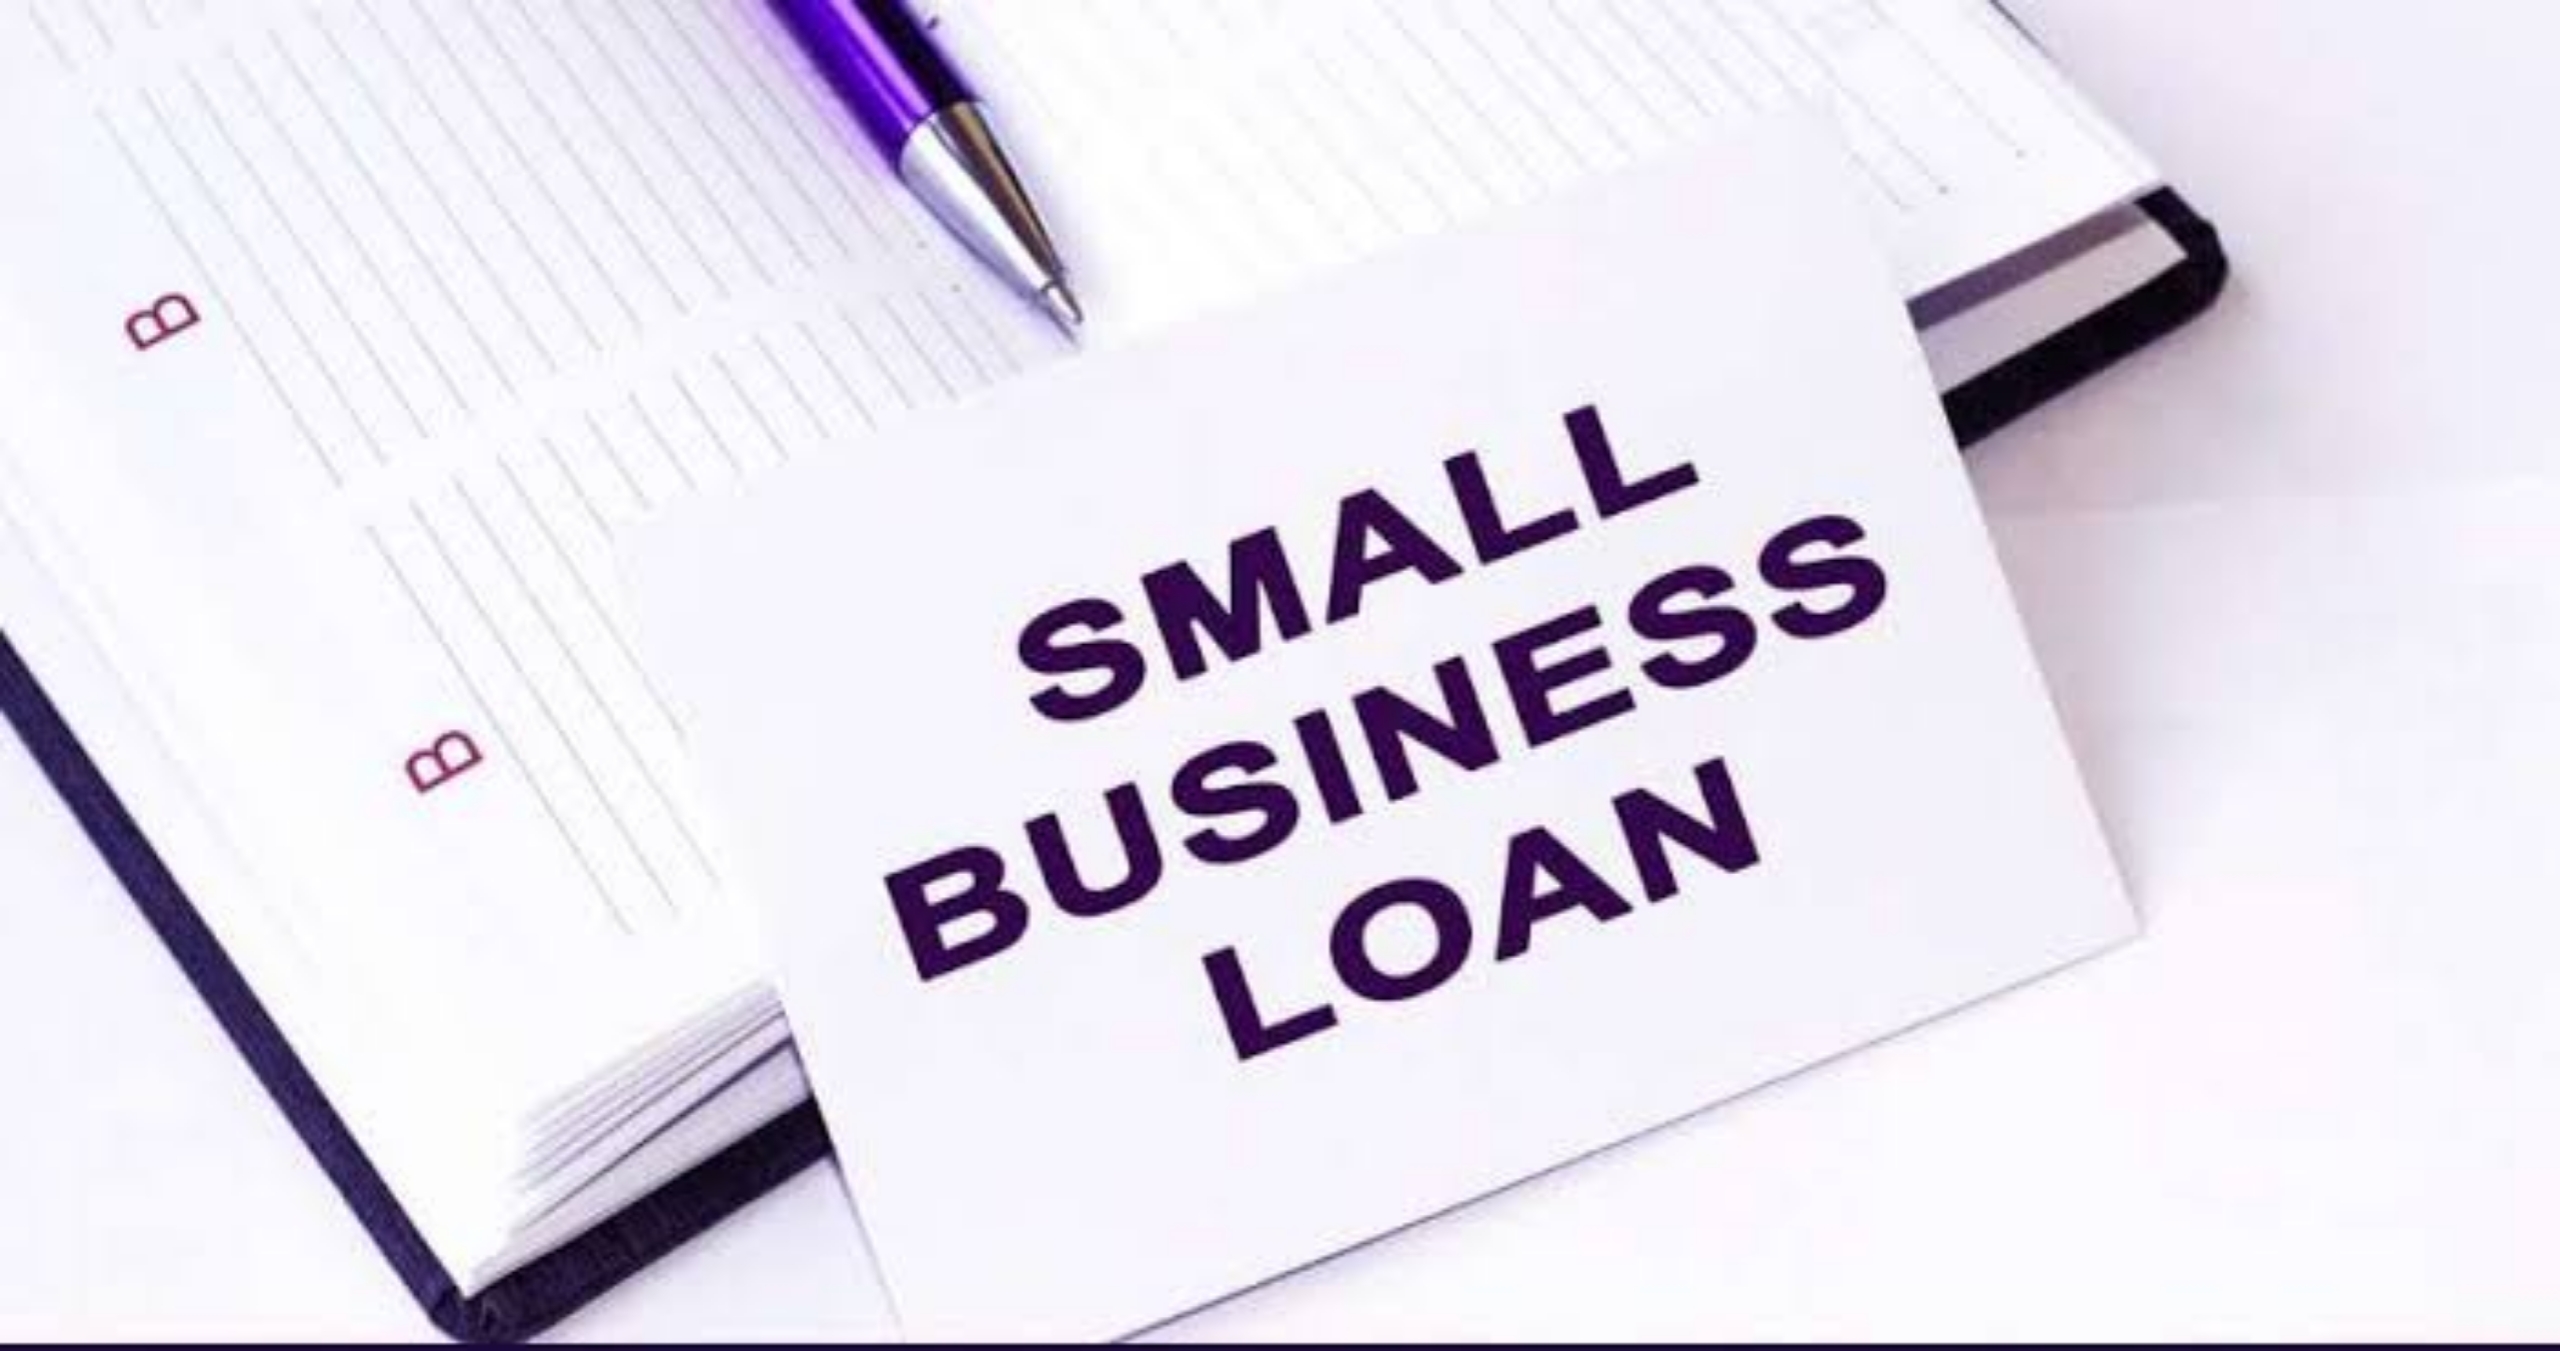 Small Business Loans and Financing Every Entrepreneurs Should Understand